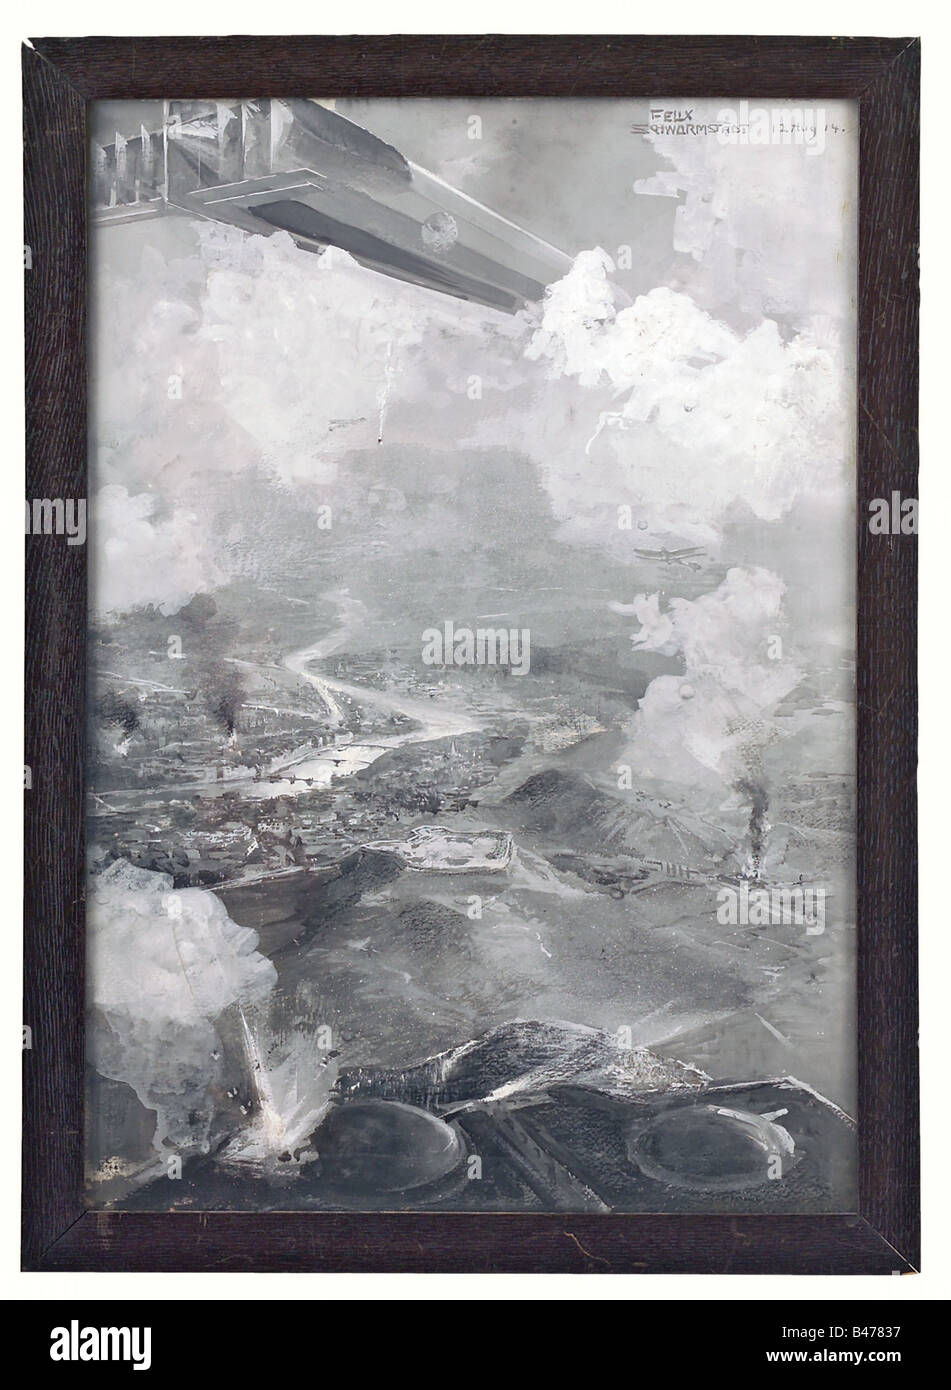 Felix Schwormstädt (1870 - 1938), LZ 21 Z.VI at the attack on Liège on 6 August 1914. Grisaille painting with white highlights. Signed and dated, 'Felix Schwormstädt 12 Aug. 14' on the upper right. The airship is at a high altitude between the clouds during the bombing of Liège. A biplane is attacking from the front. In the foreground, there are bomb explosions and clouds of smoke on the ground, with Liège in the background. Framed and under glass: 58.5 x 42 cm. This picture was published as a postcard by the Leipzig Illustrierten Zeitung (Illust, Additional-Rights-Clearance-Info-Not-Available Stock Photo